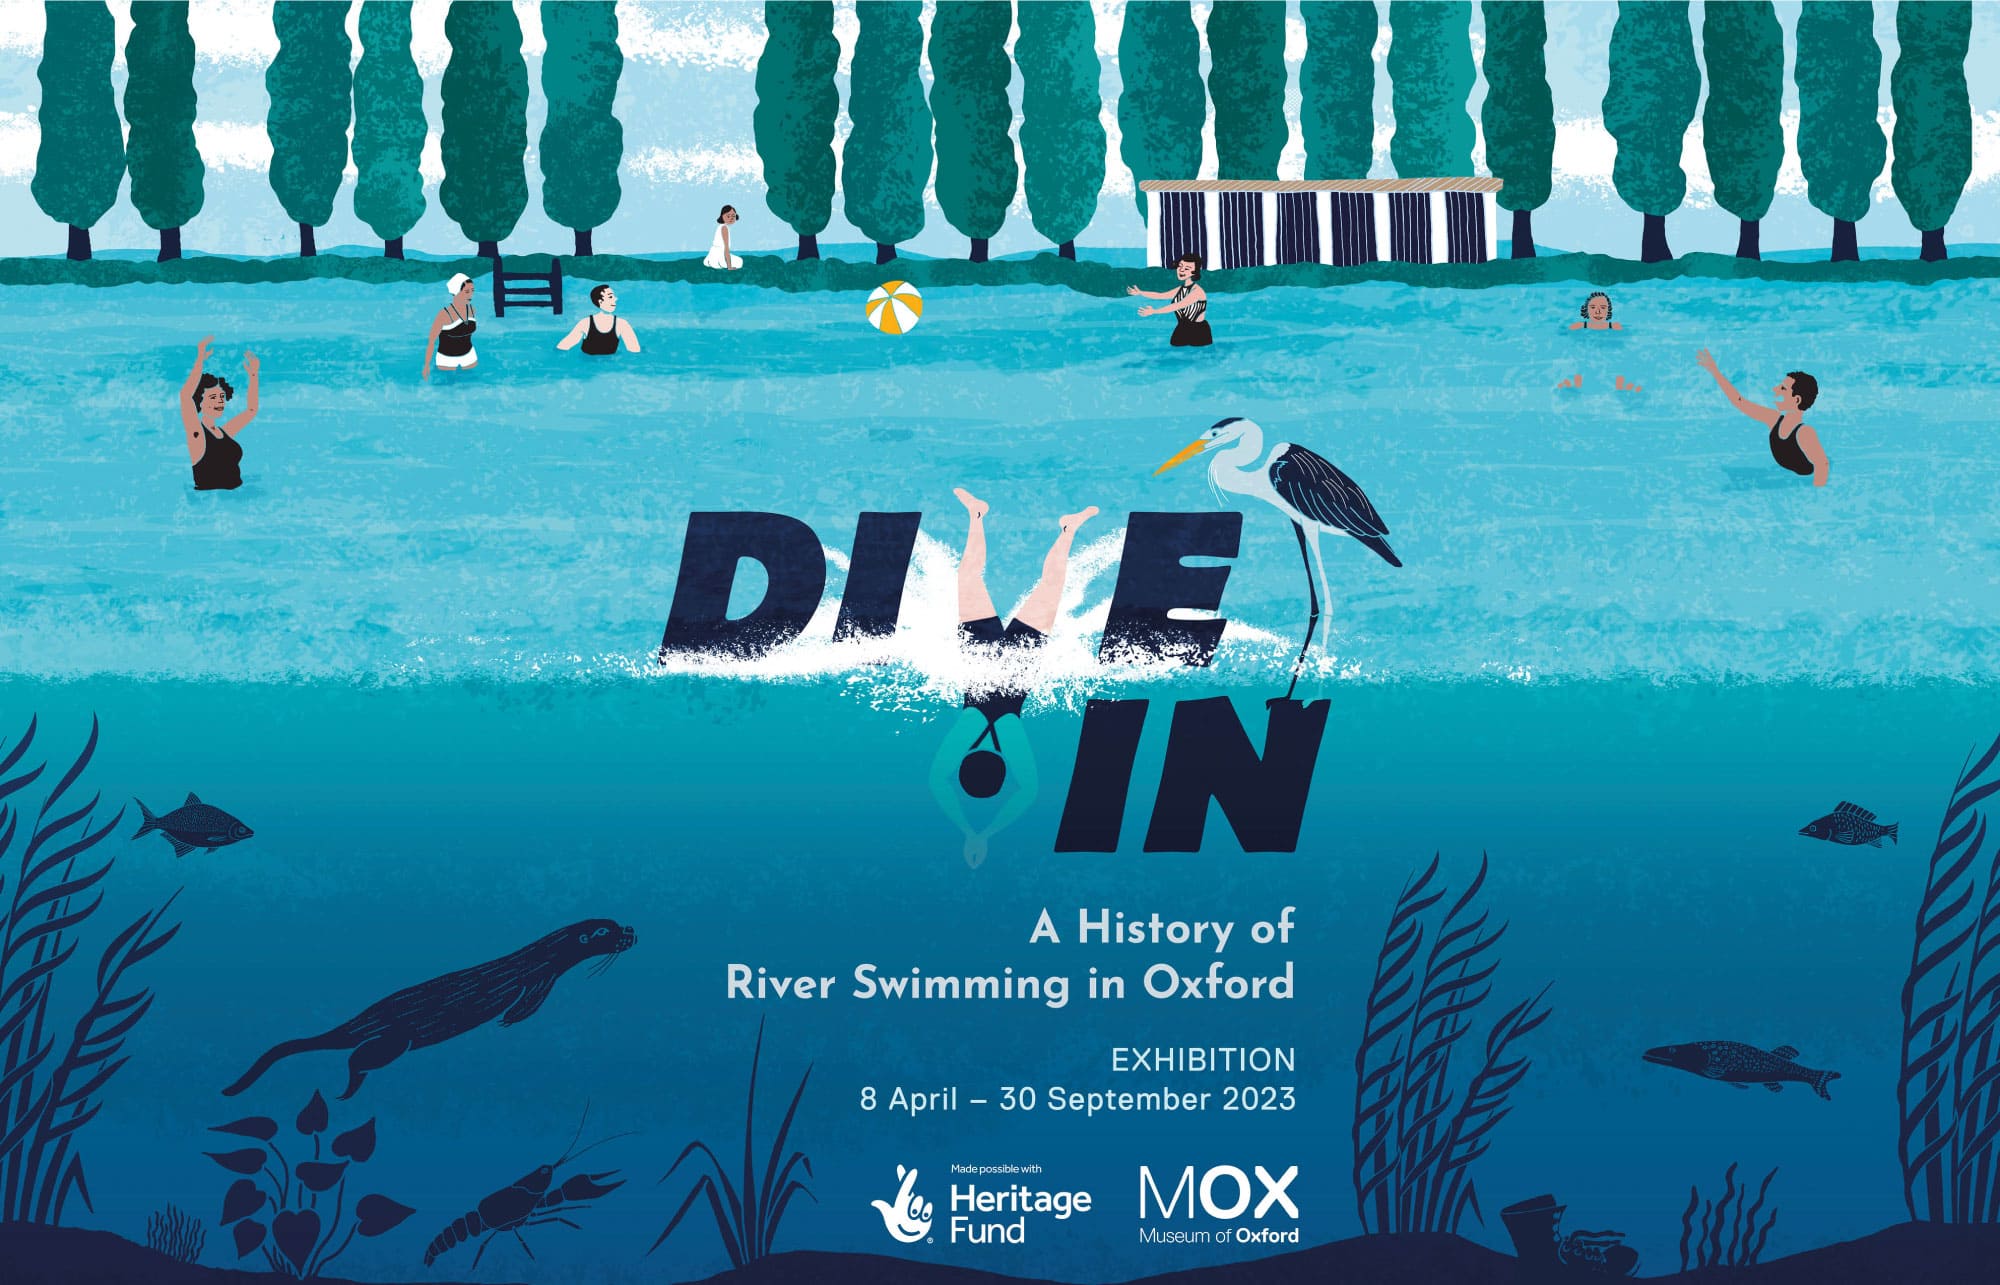 River Swimming in Oxford museum exhibition poster showing the river, swimmers, animals and plants